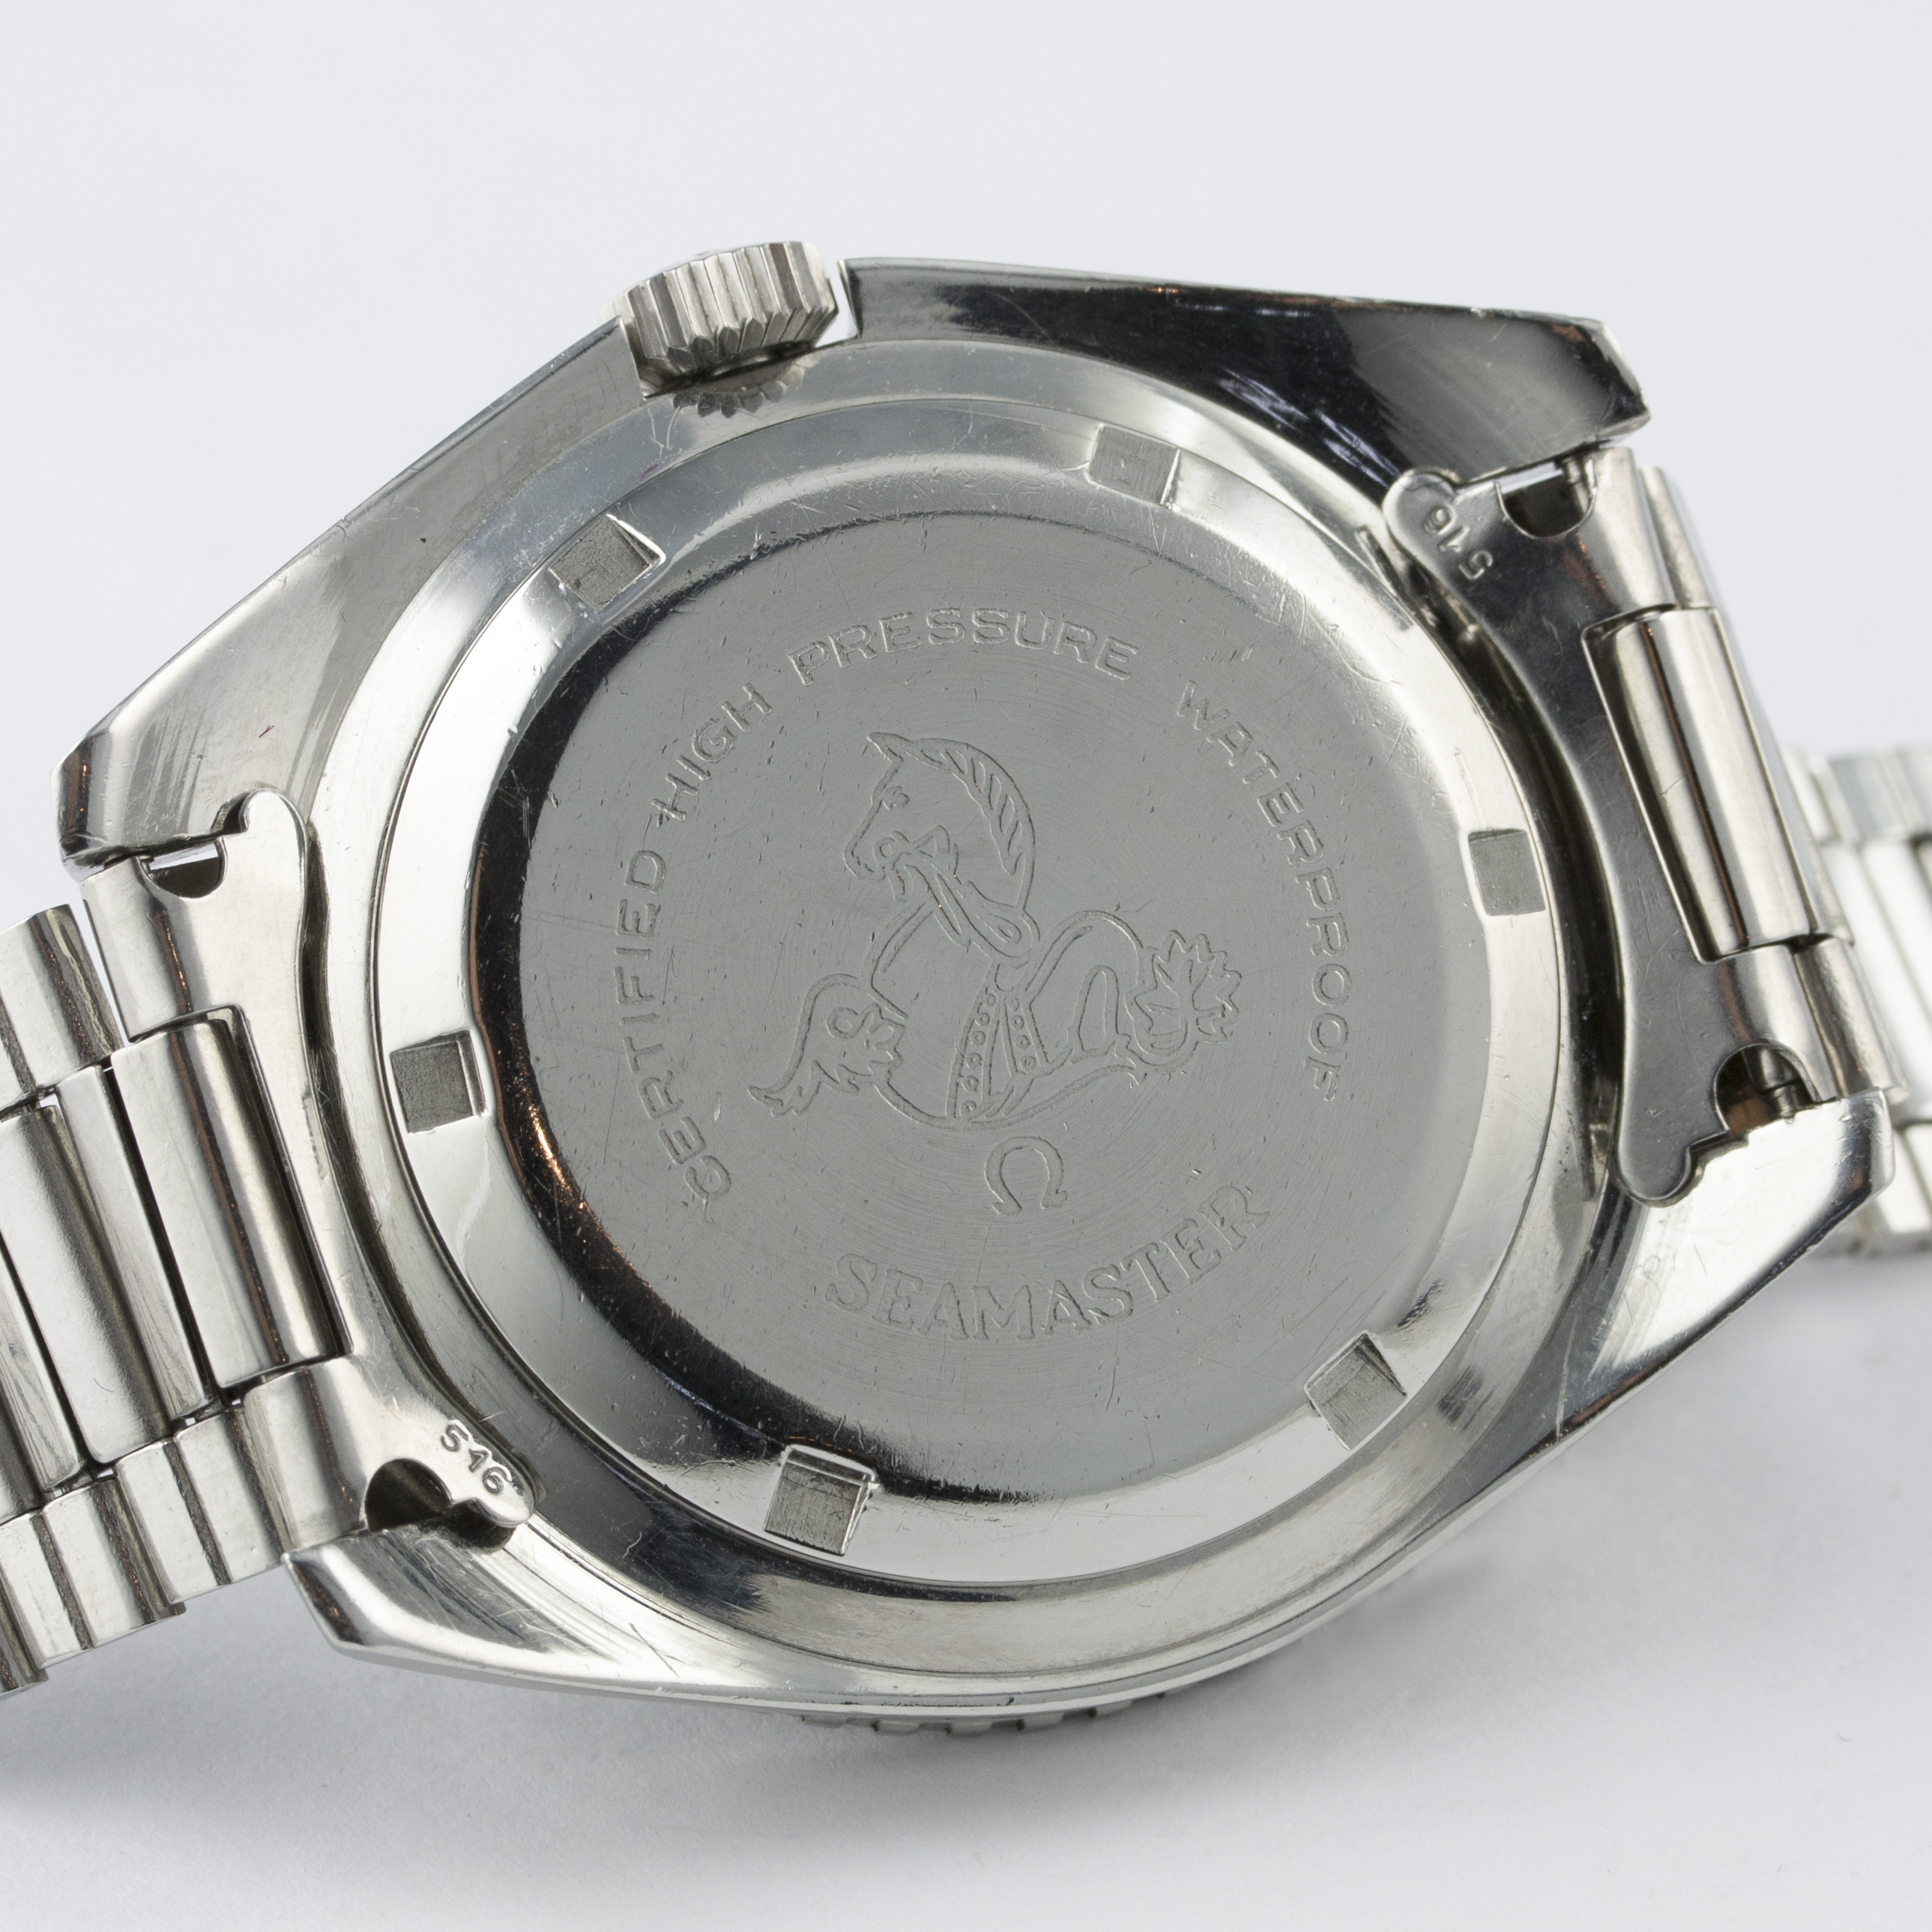 A RARE GENTLEMAN'S STAINLESS STEEL OMEGA SEAMASTER 300 BRACELET WATCH CIRCA 1967, REF. 165.024 D: - Image 8 of 10